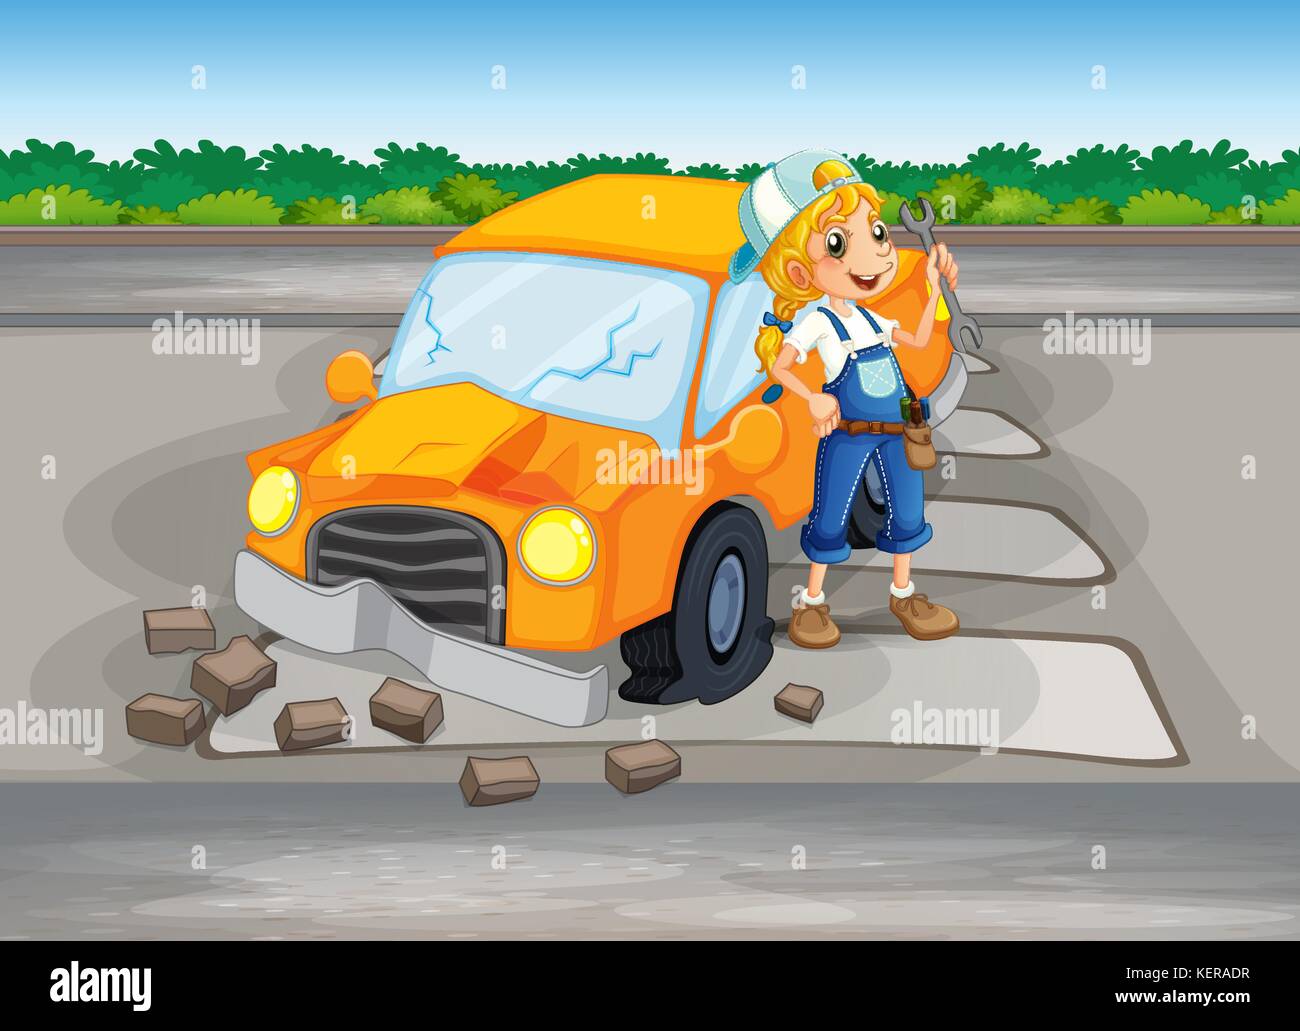 Illustration of a girl repairing the damaged car at the road Stock Vector